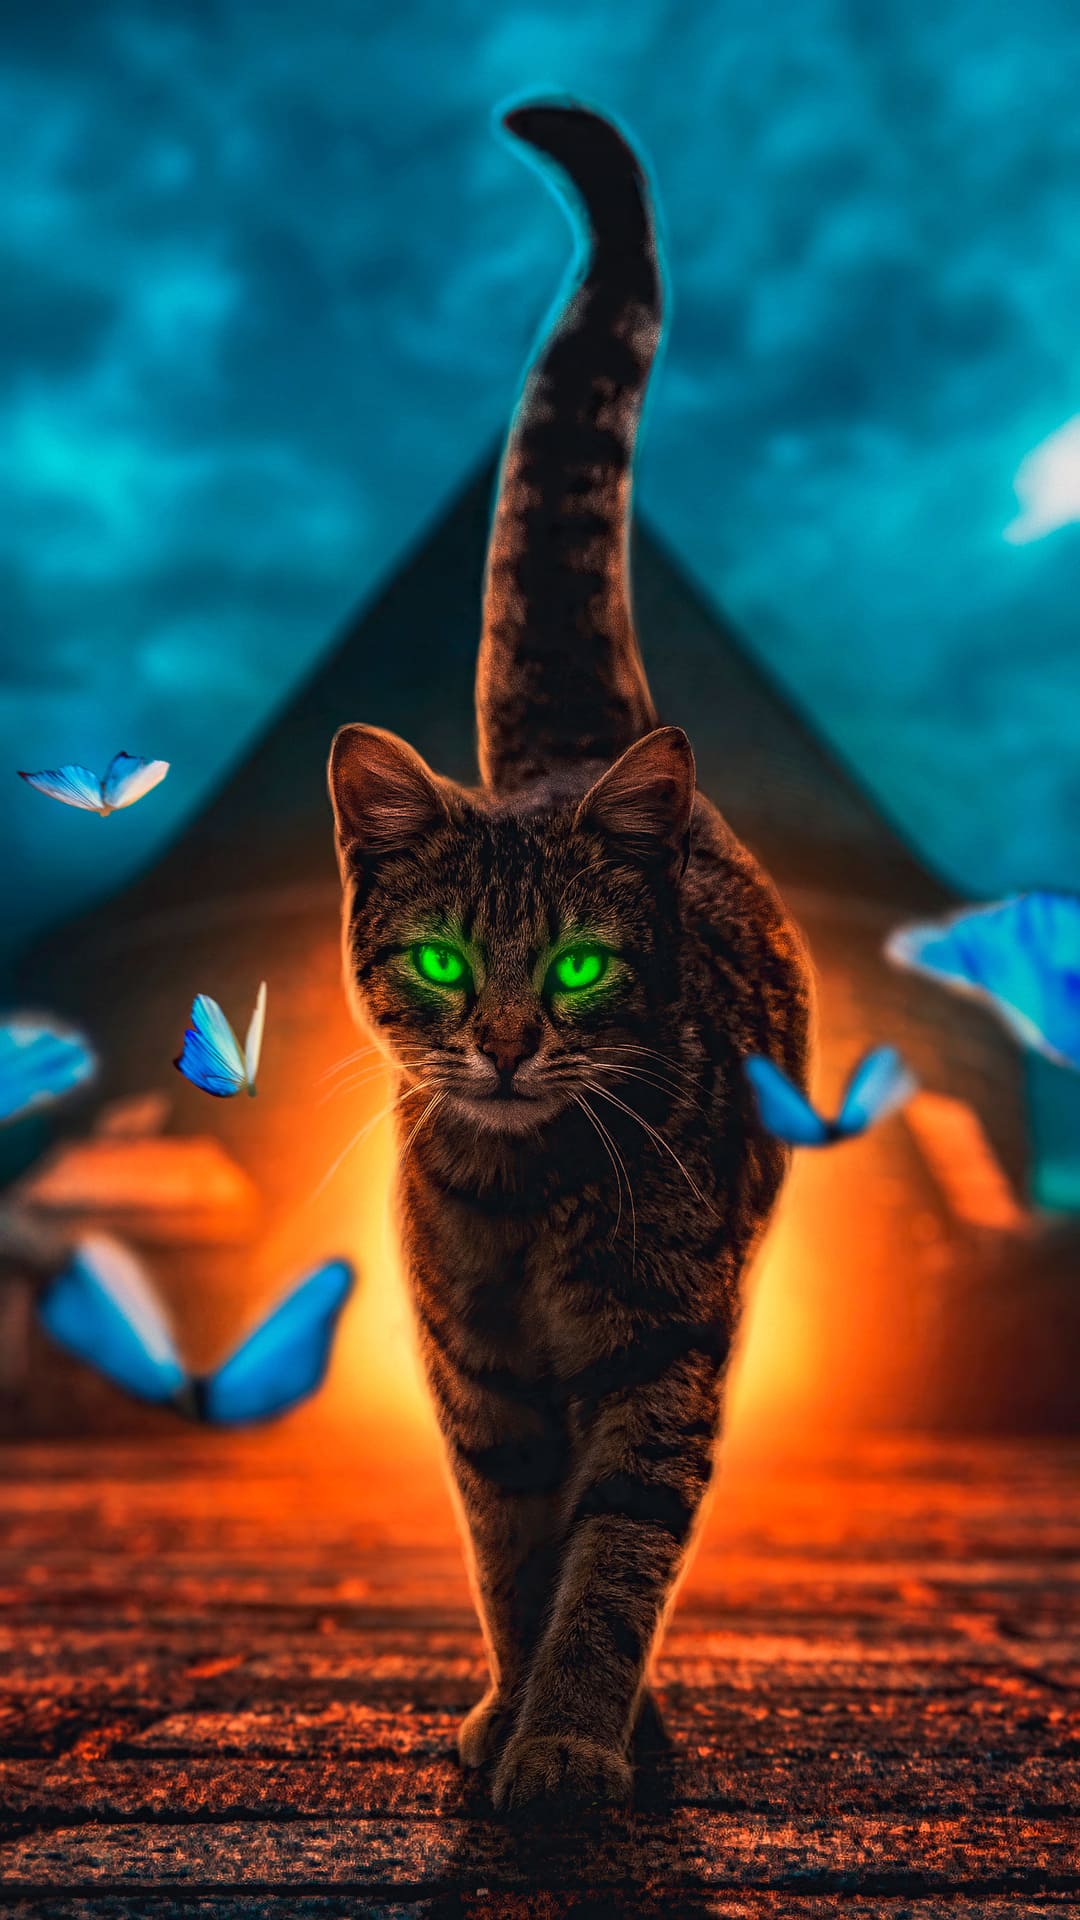 A cat with glowing eyes walking in front of a pyramid - Cat